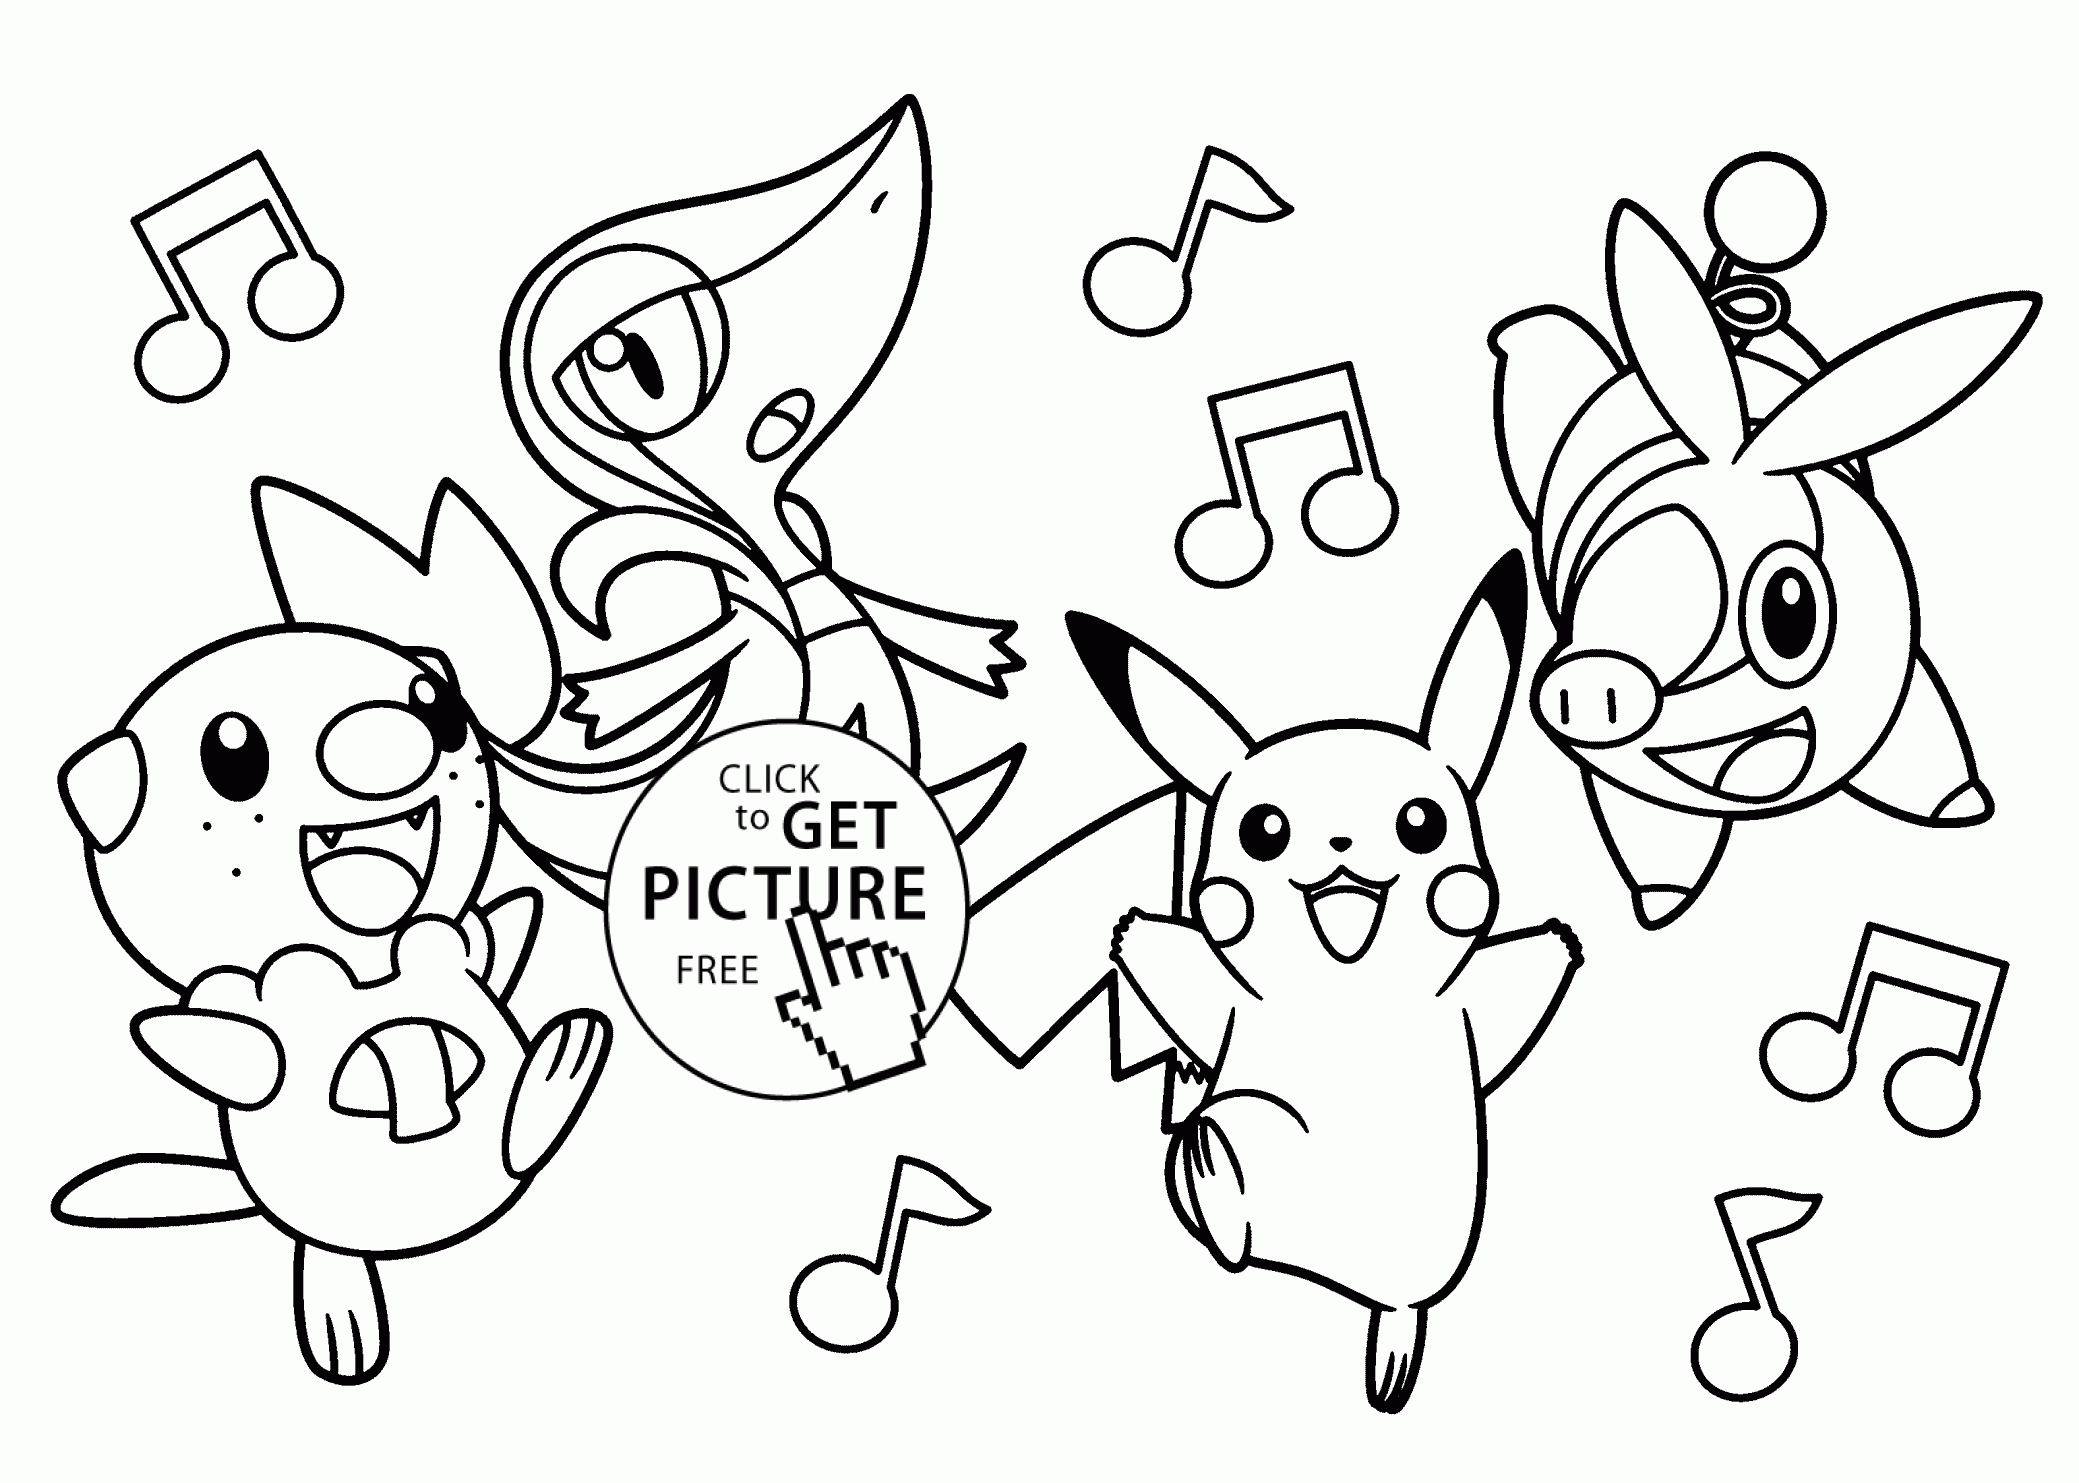 Very Funny Pokemon Anime Coloring Pages For Kids, Printable Free - Pokemon Coloring Sheets Free Printable